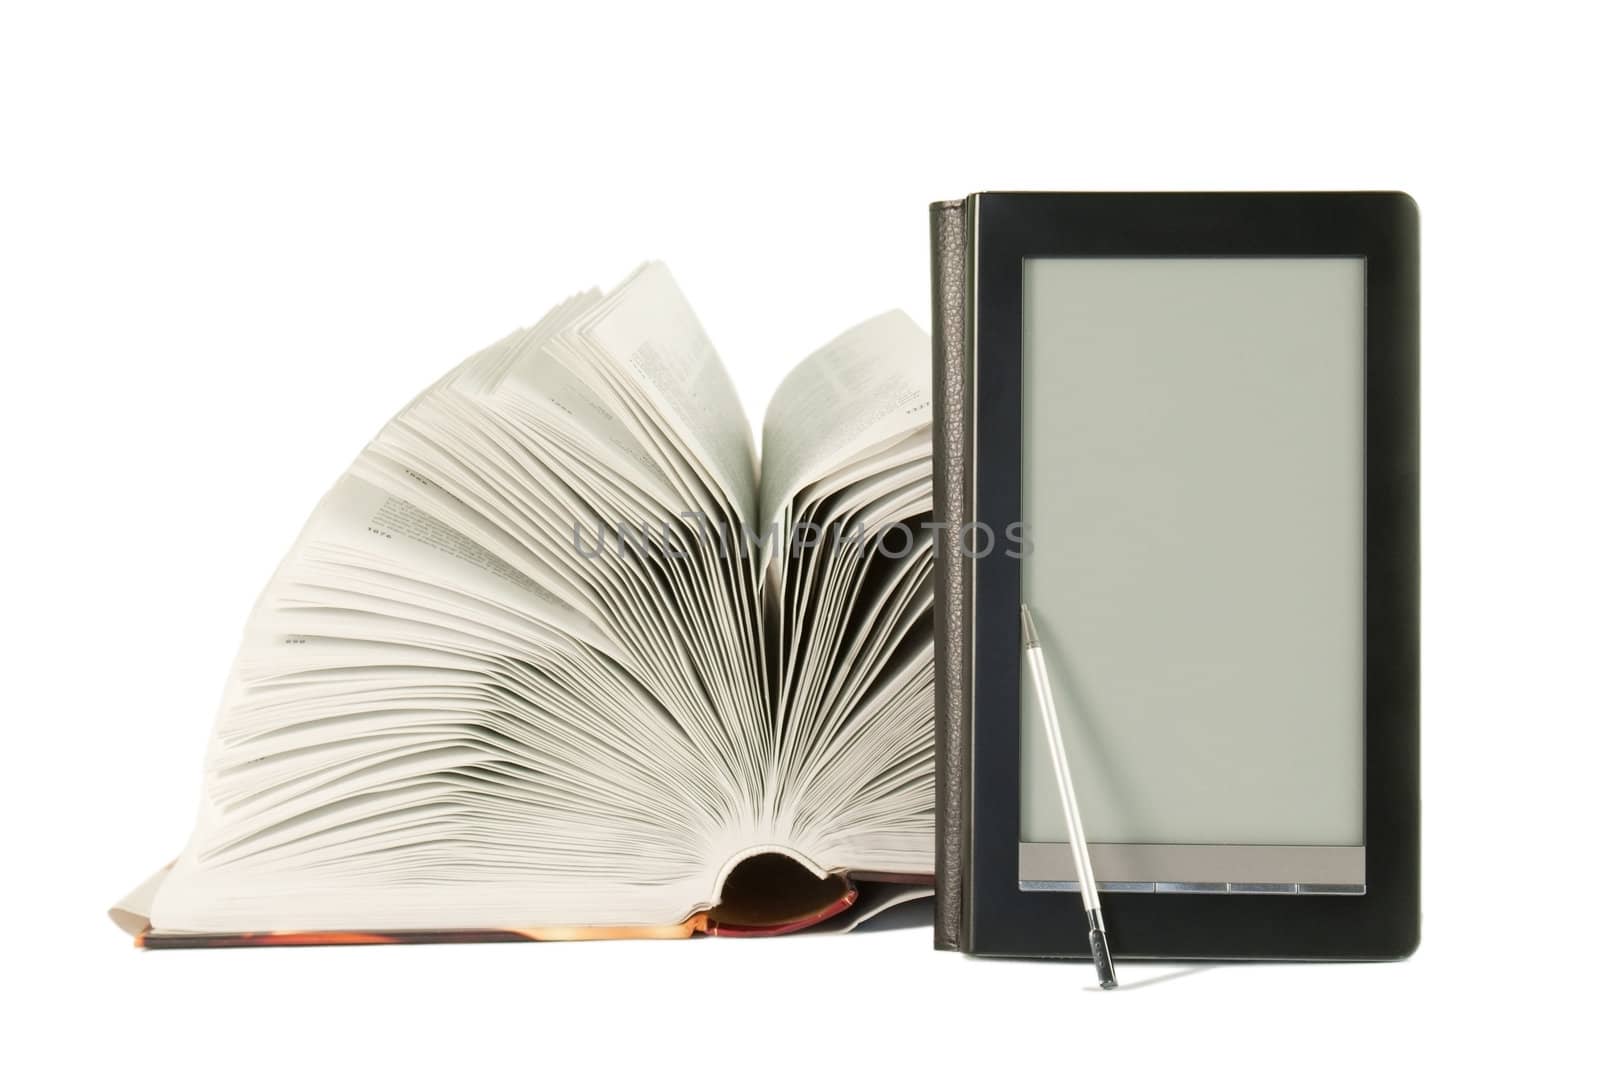 Open book and e-book reader by AndreyKr